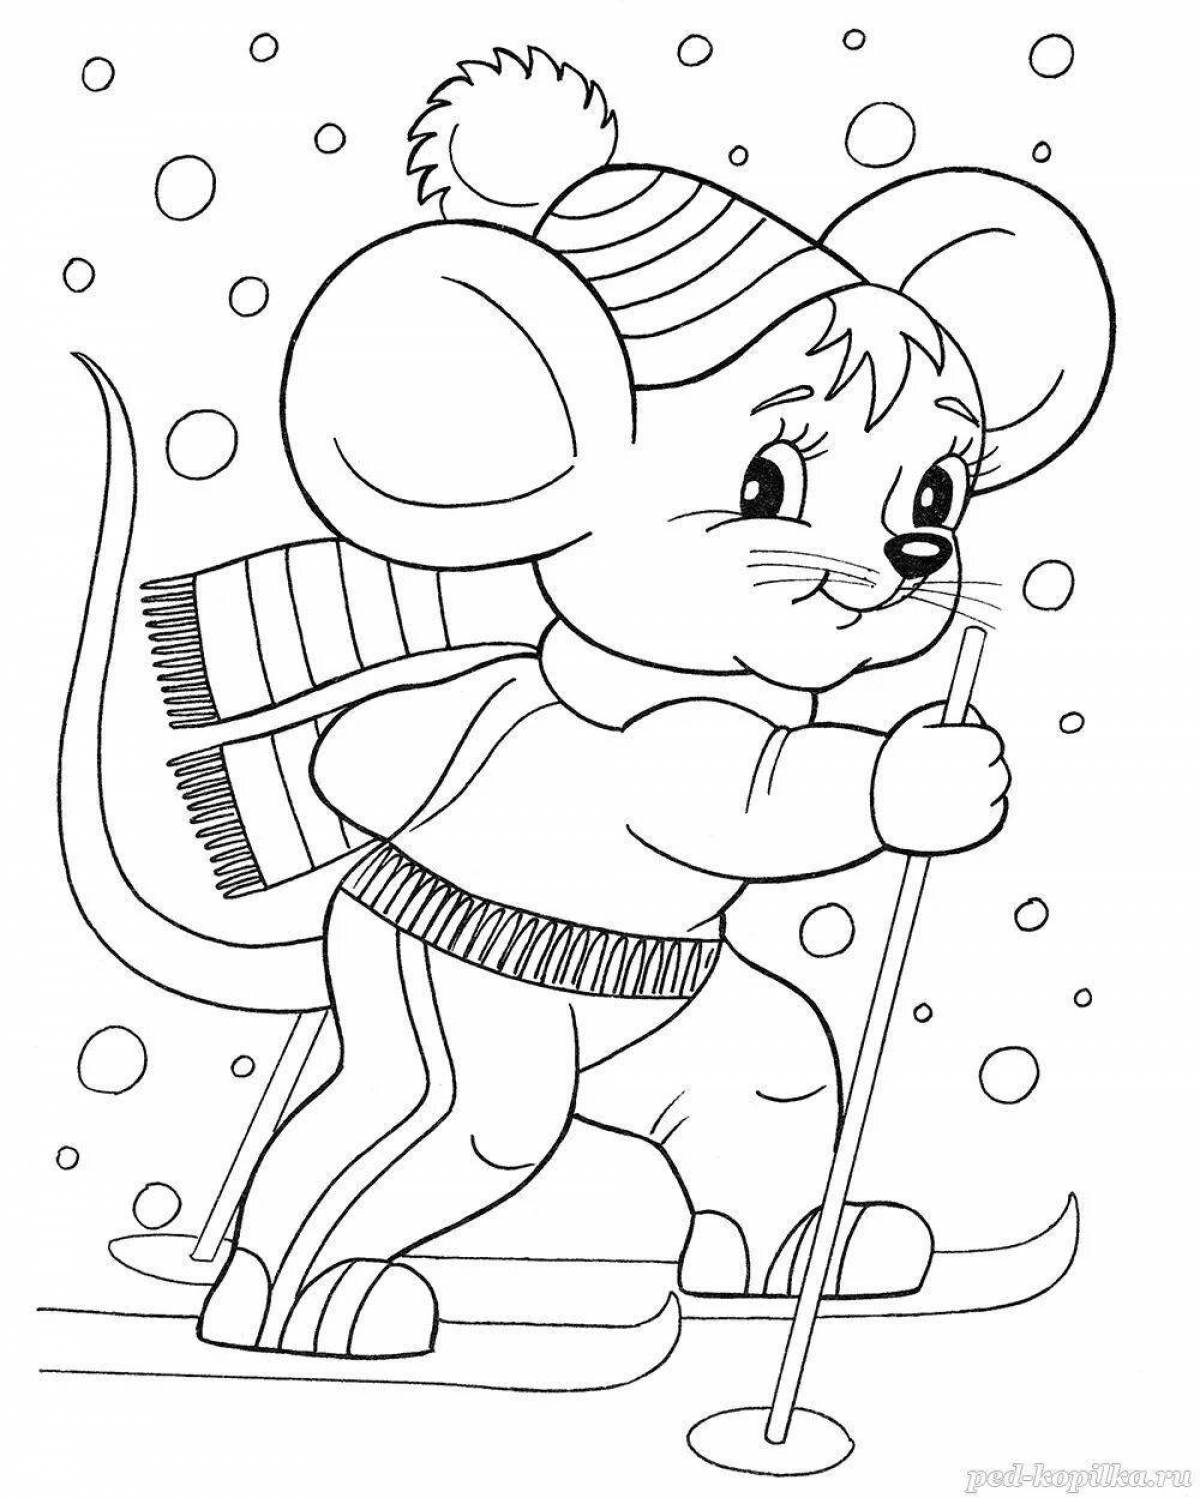 A mouse clinging to an icicle in winter